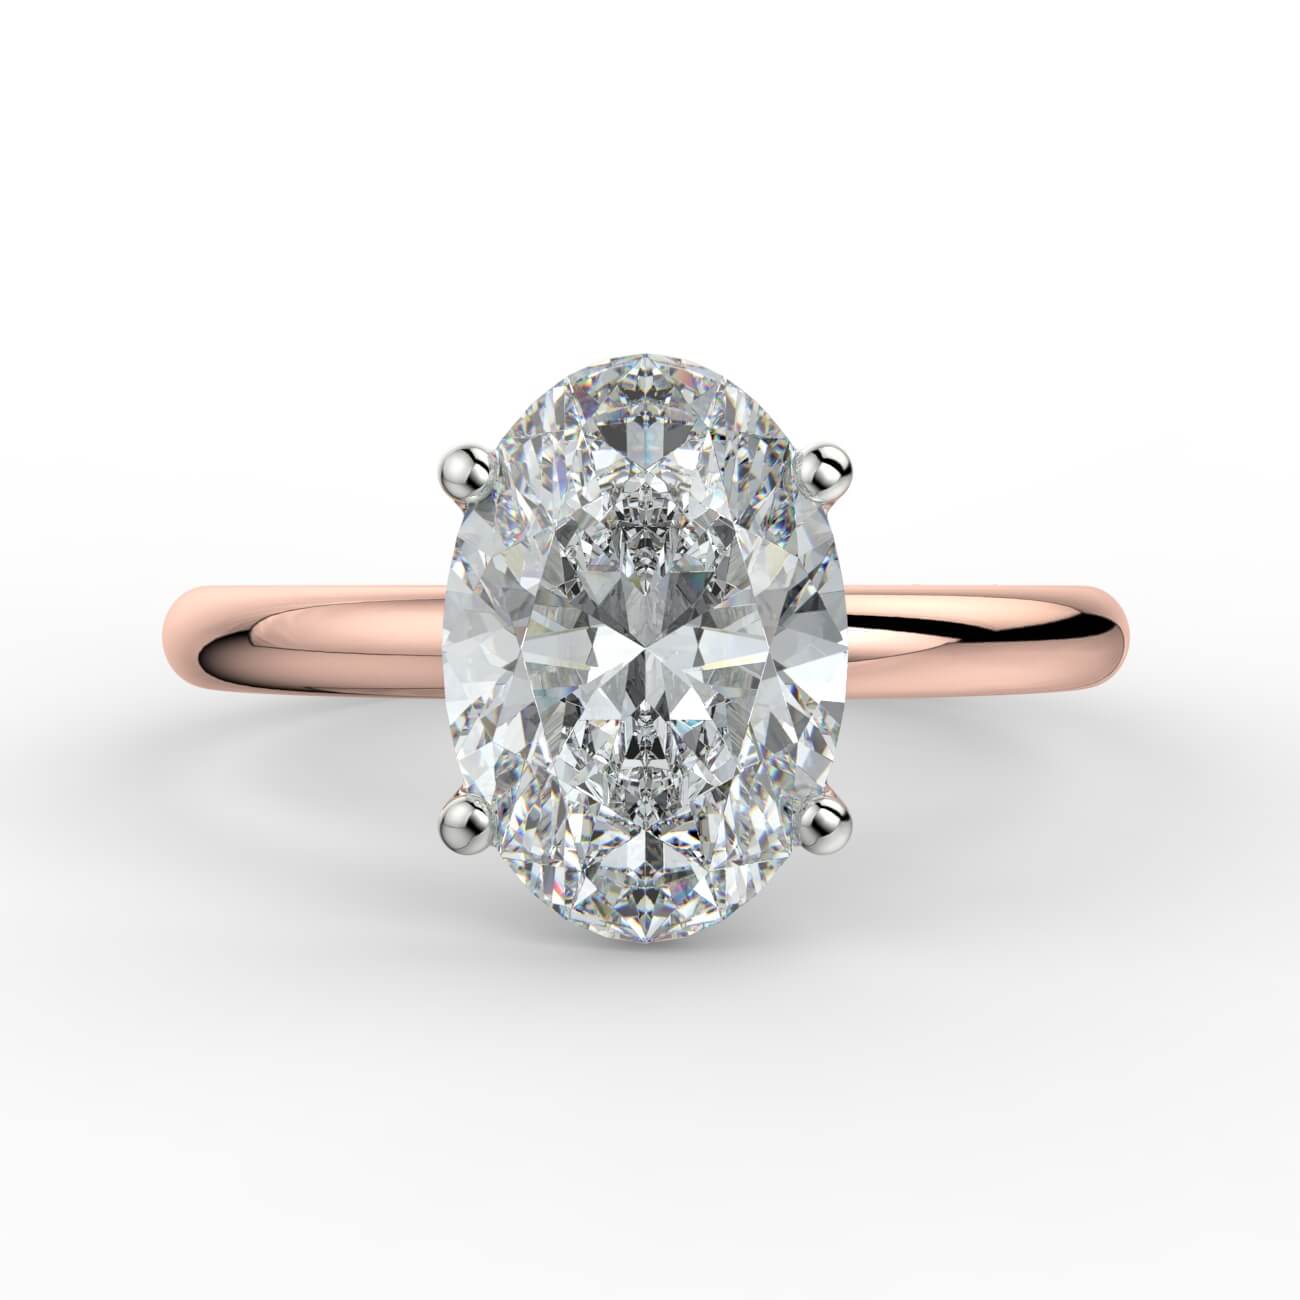 Comfort fit 4 claw oval solitaire diamond ring in white and rose gold – Australian Diamond Network